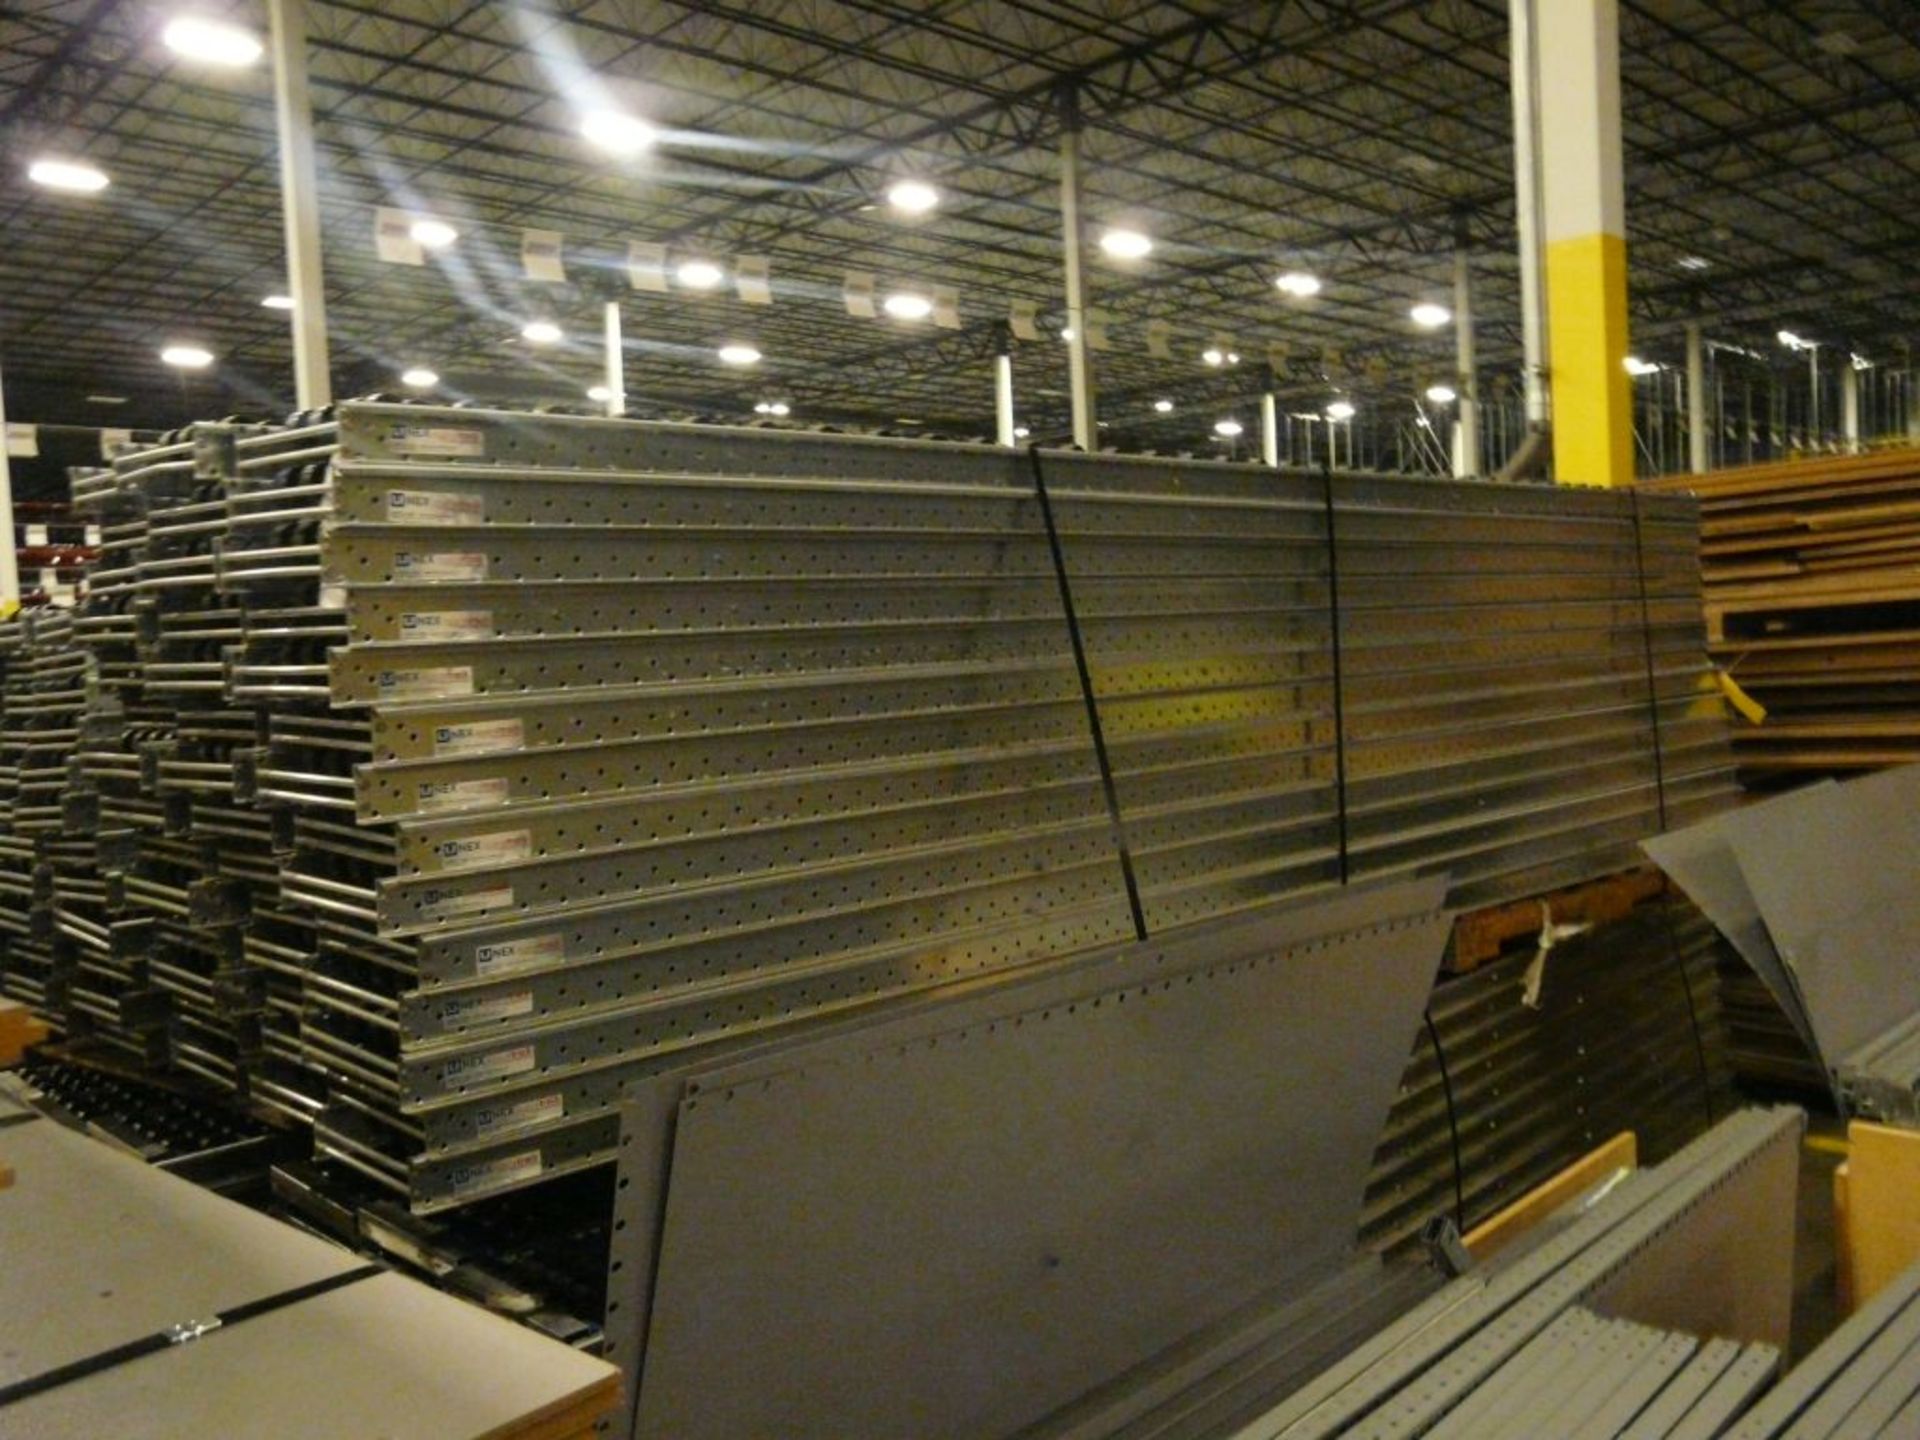 Lot of (108) SpanTrack Wheelbed Carton Flow Conveyors - 153"L x 10"W; Tag: 223728 - $30 Lot - Image 3 of 4